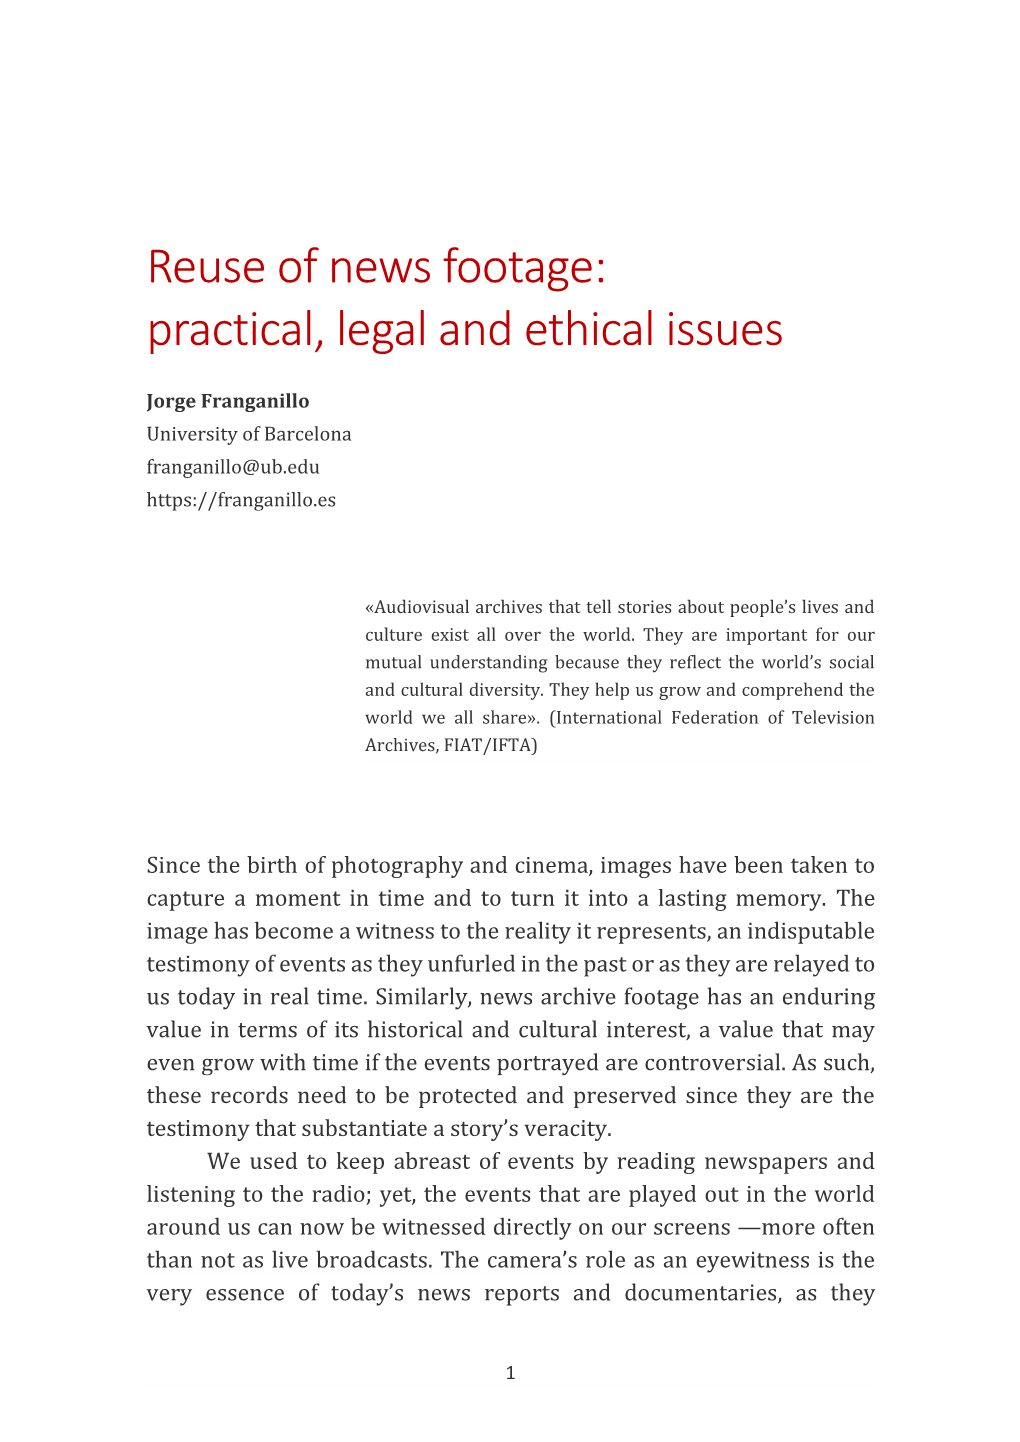 Reuse of News Footage: Practical, Legal and Ethical Issues